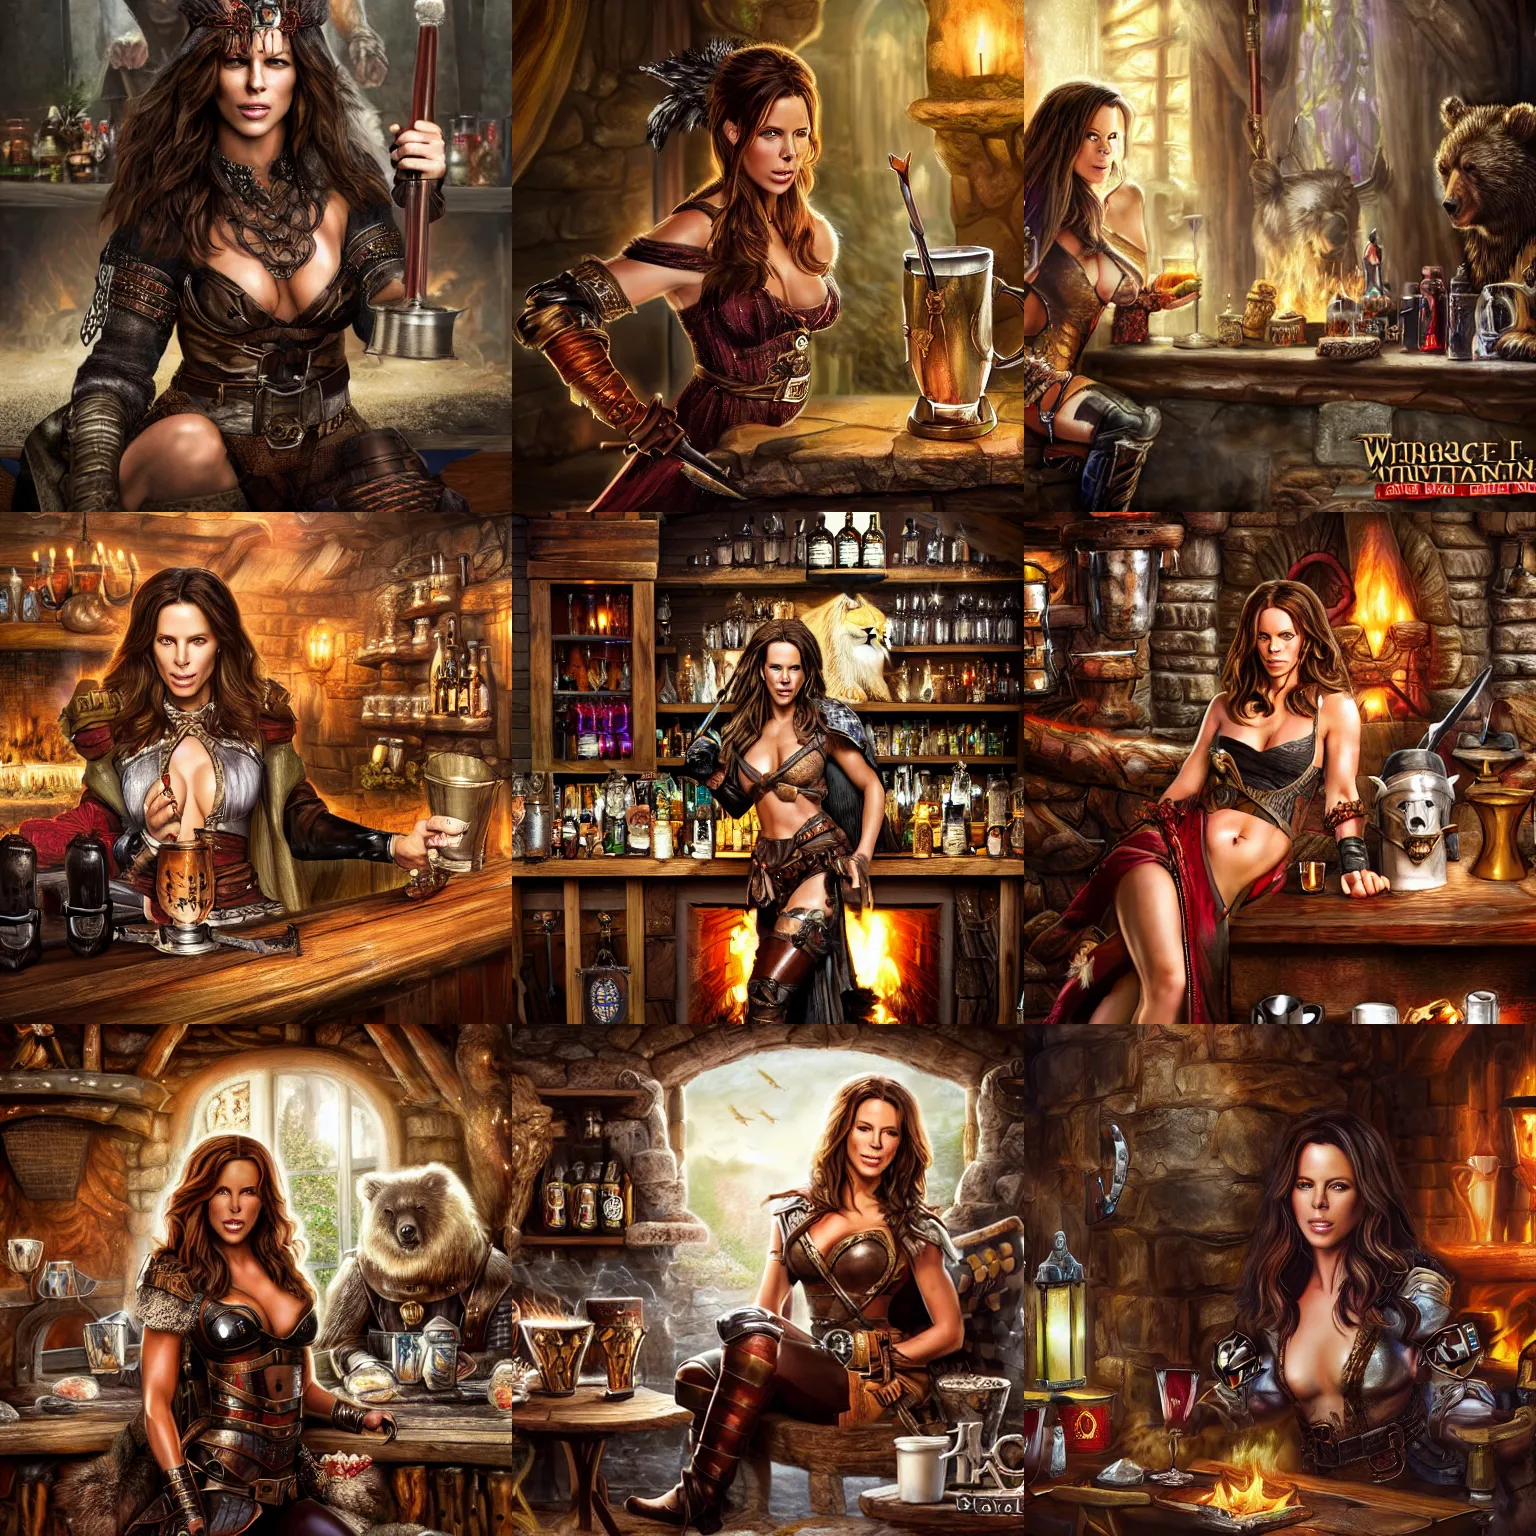 Prompt: kate beckinsale as warrior, sit in fantasy tavern near fireplace, behind bar deck with bear mugs, medieval dnd, colorfull digital fantasy art, 4k